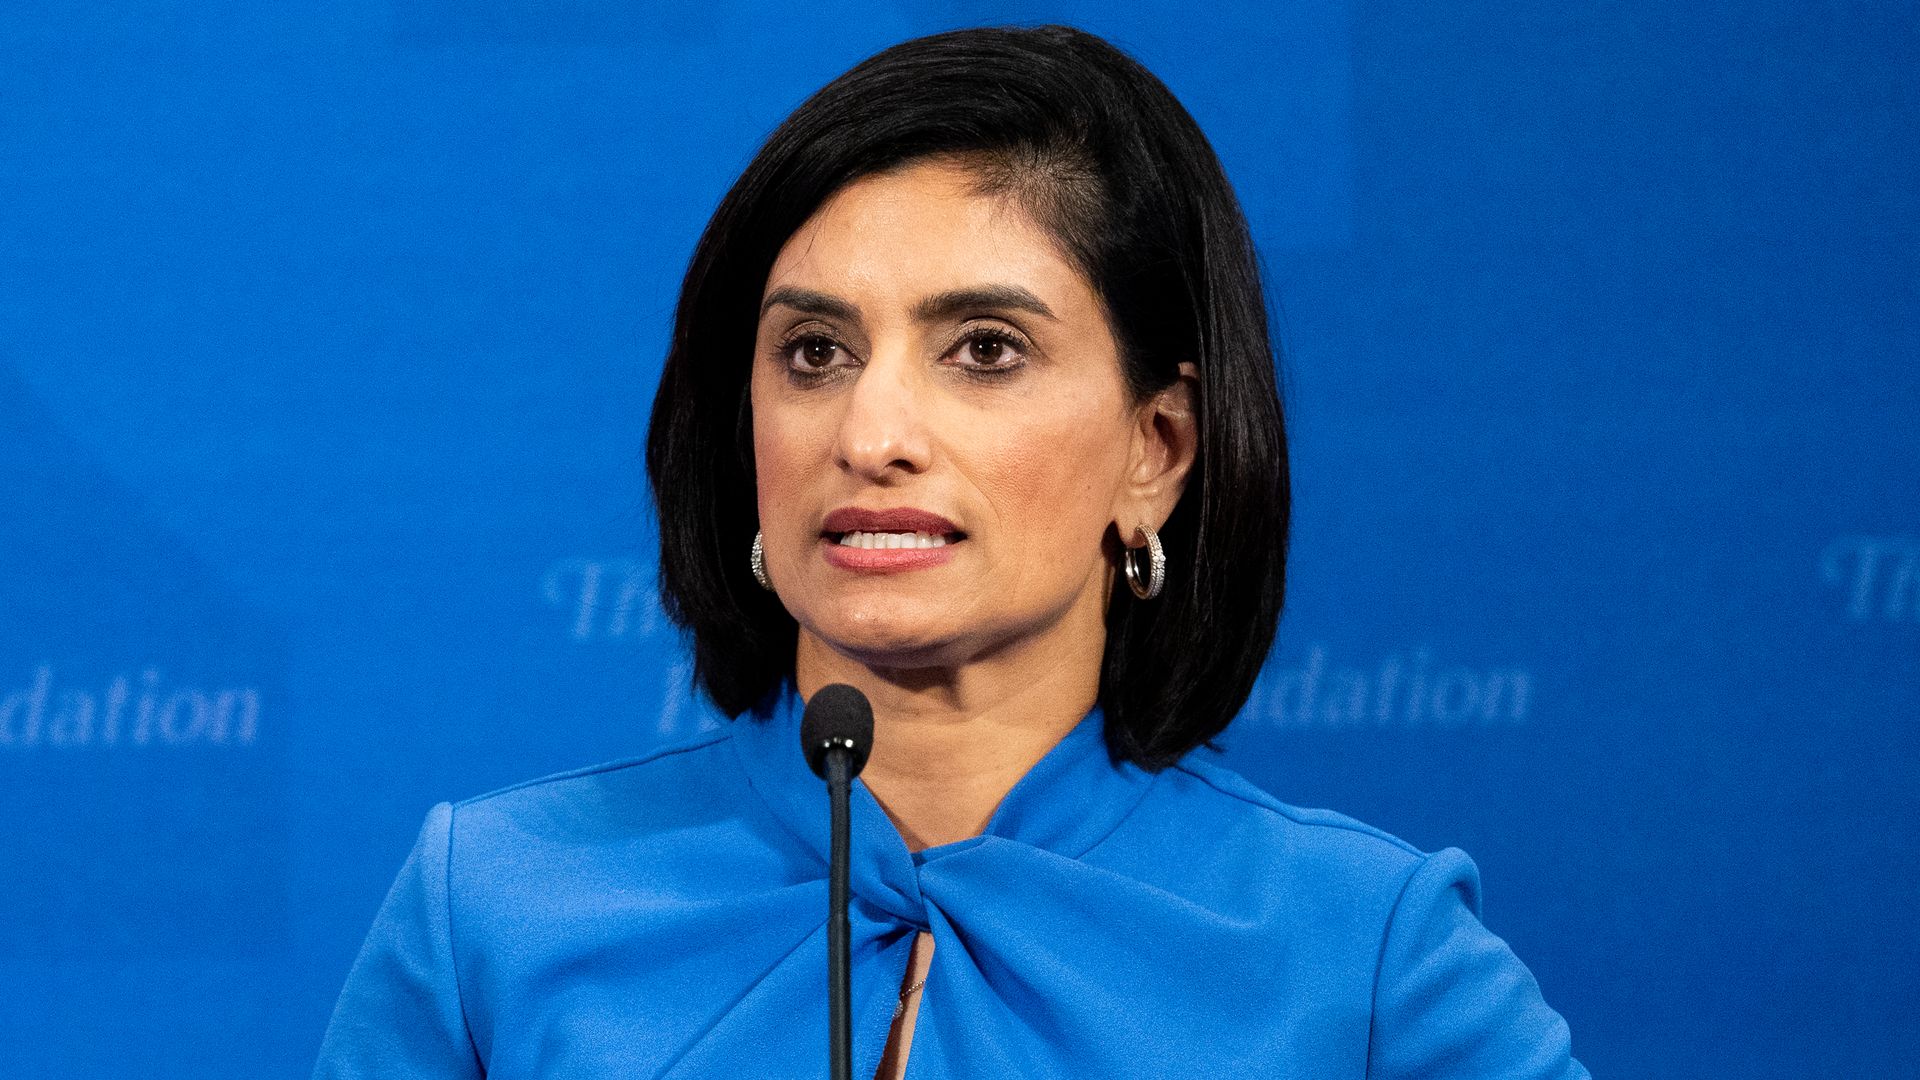 Seema Verma, Administrator, Centers for Medicare & Medicaid Services, U.S. Department of Health and Human Services 